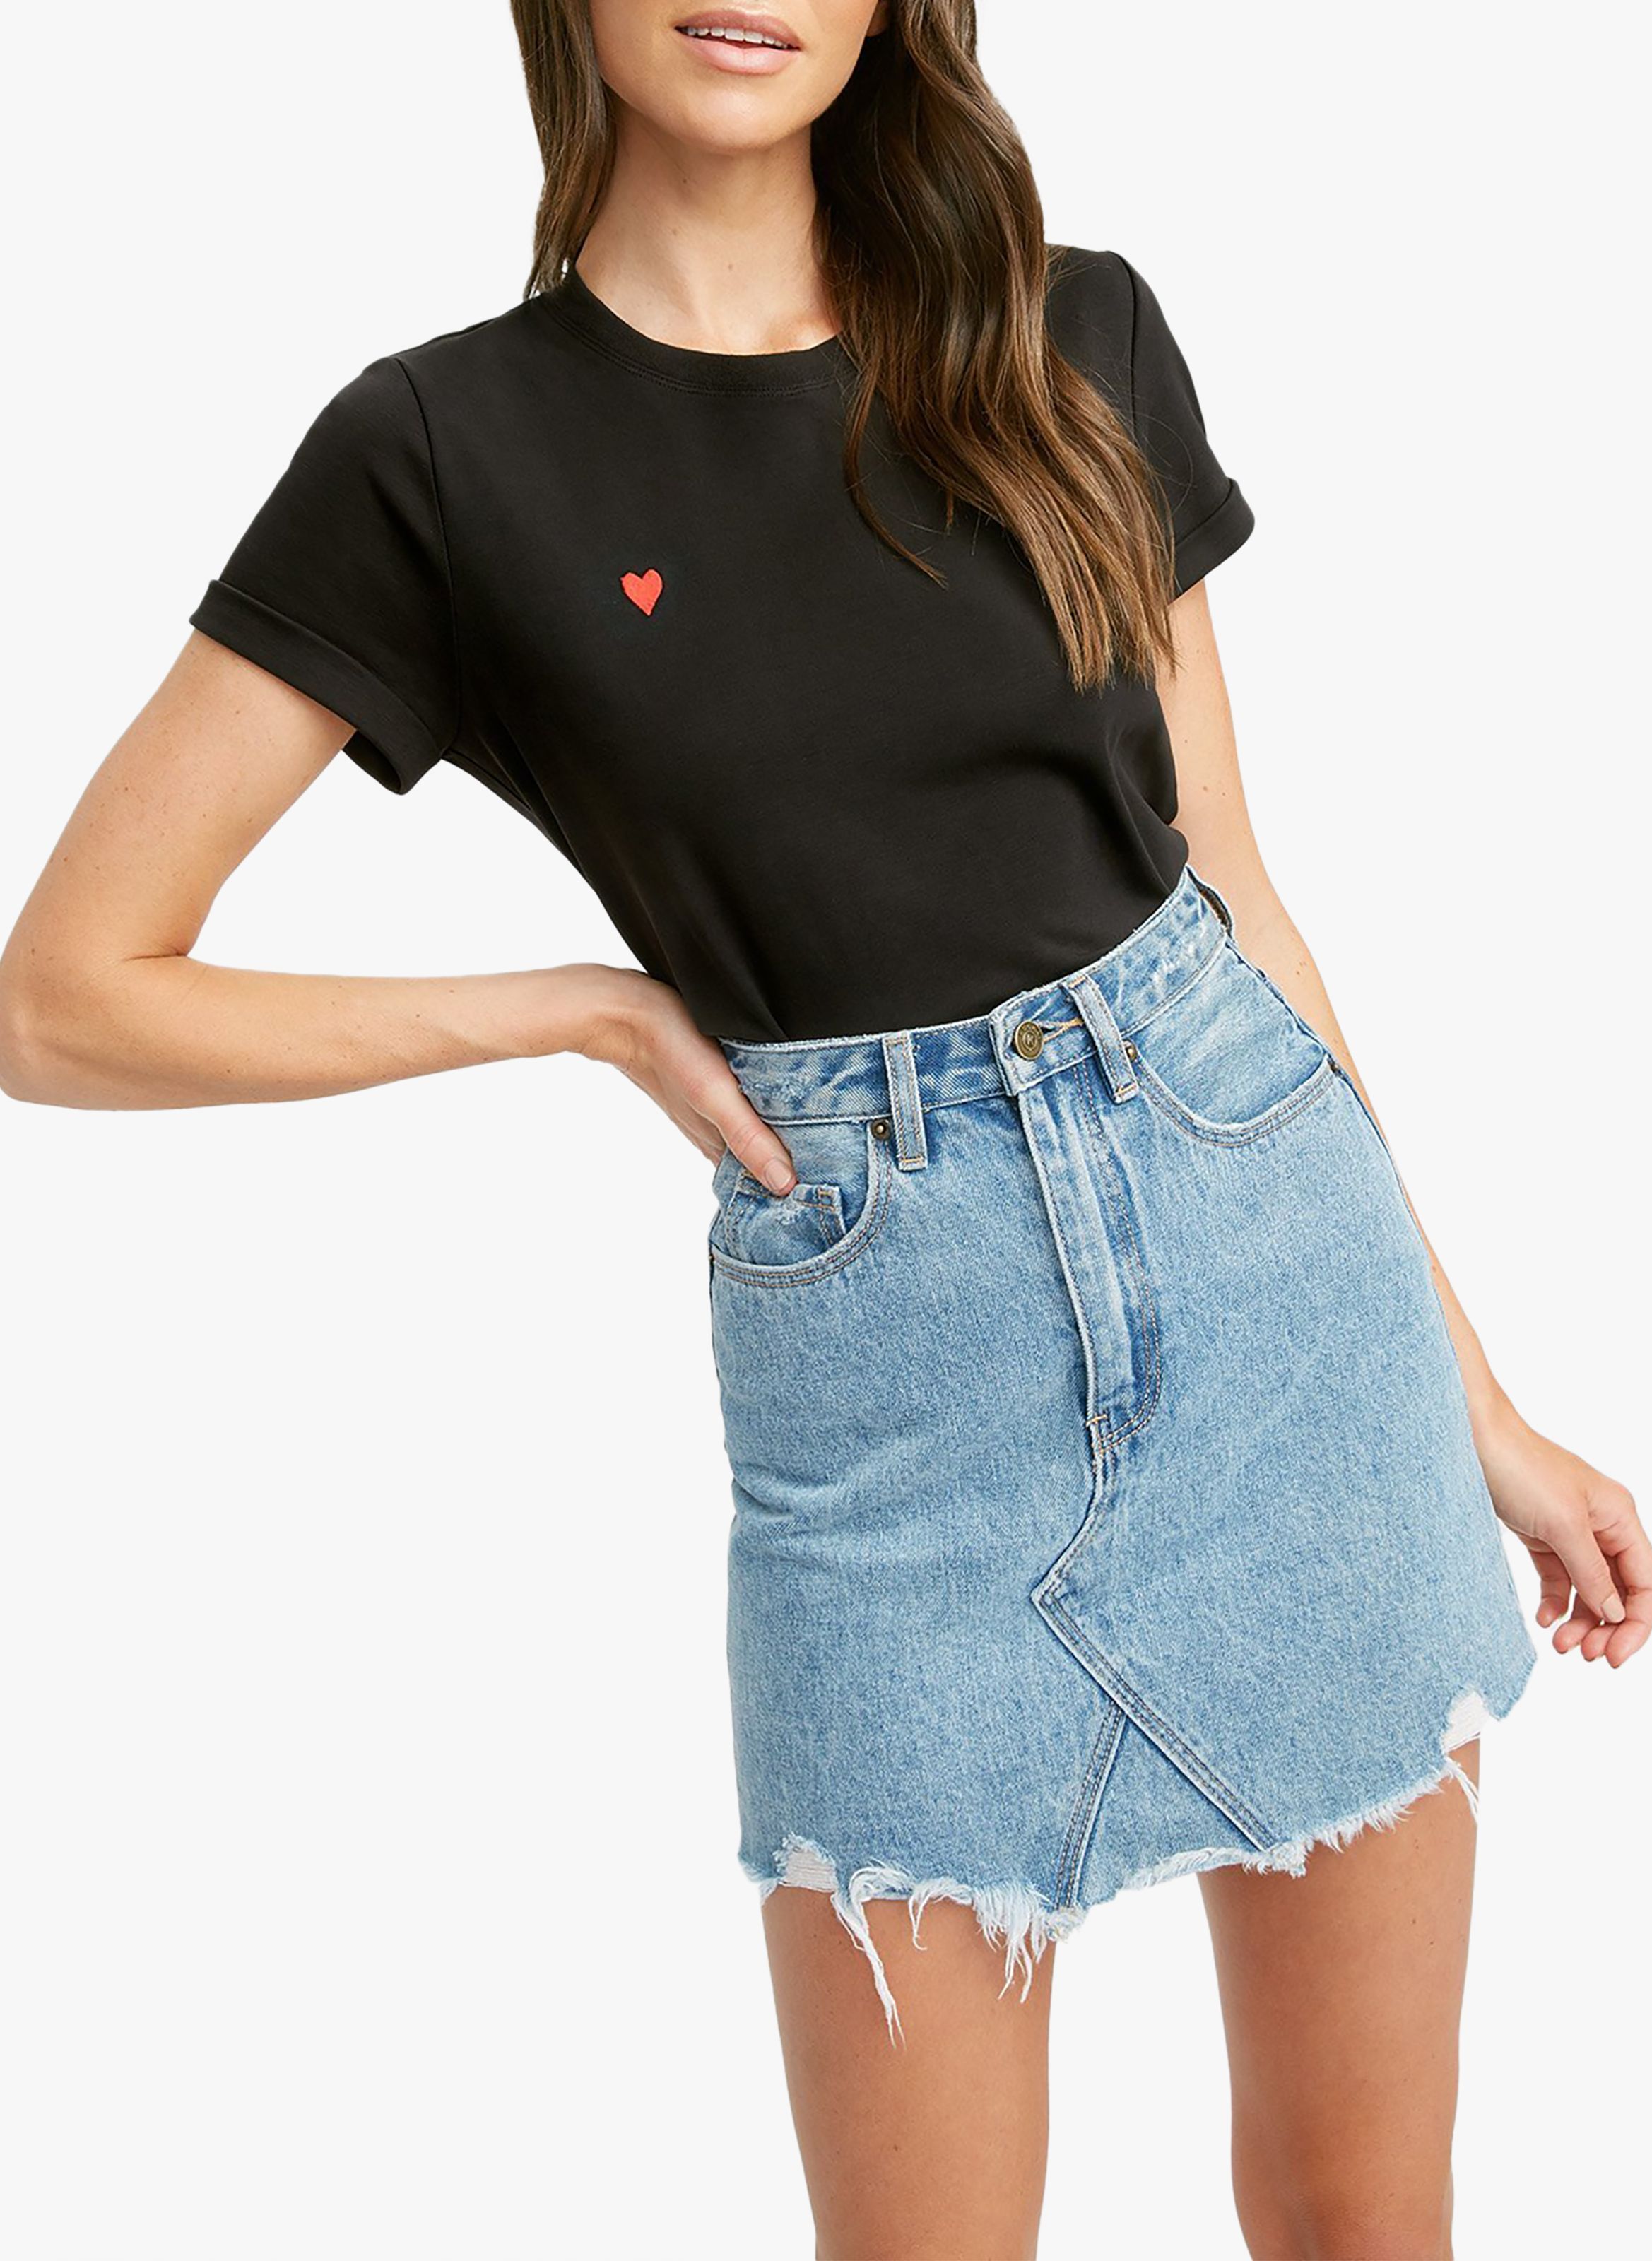 Black Round-neck cotton T-shirt with embroidered hearts